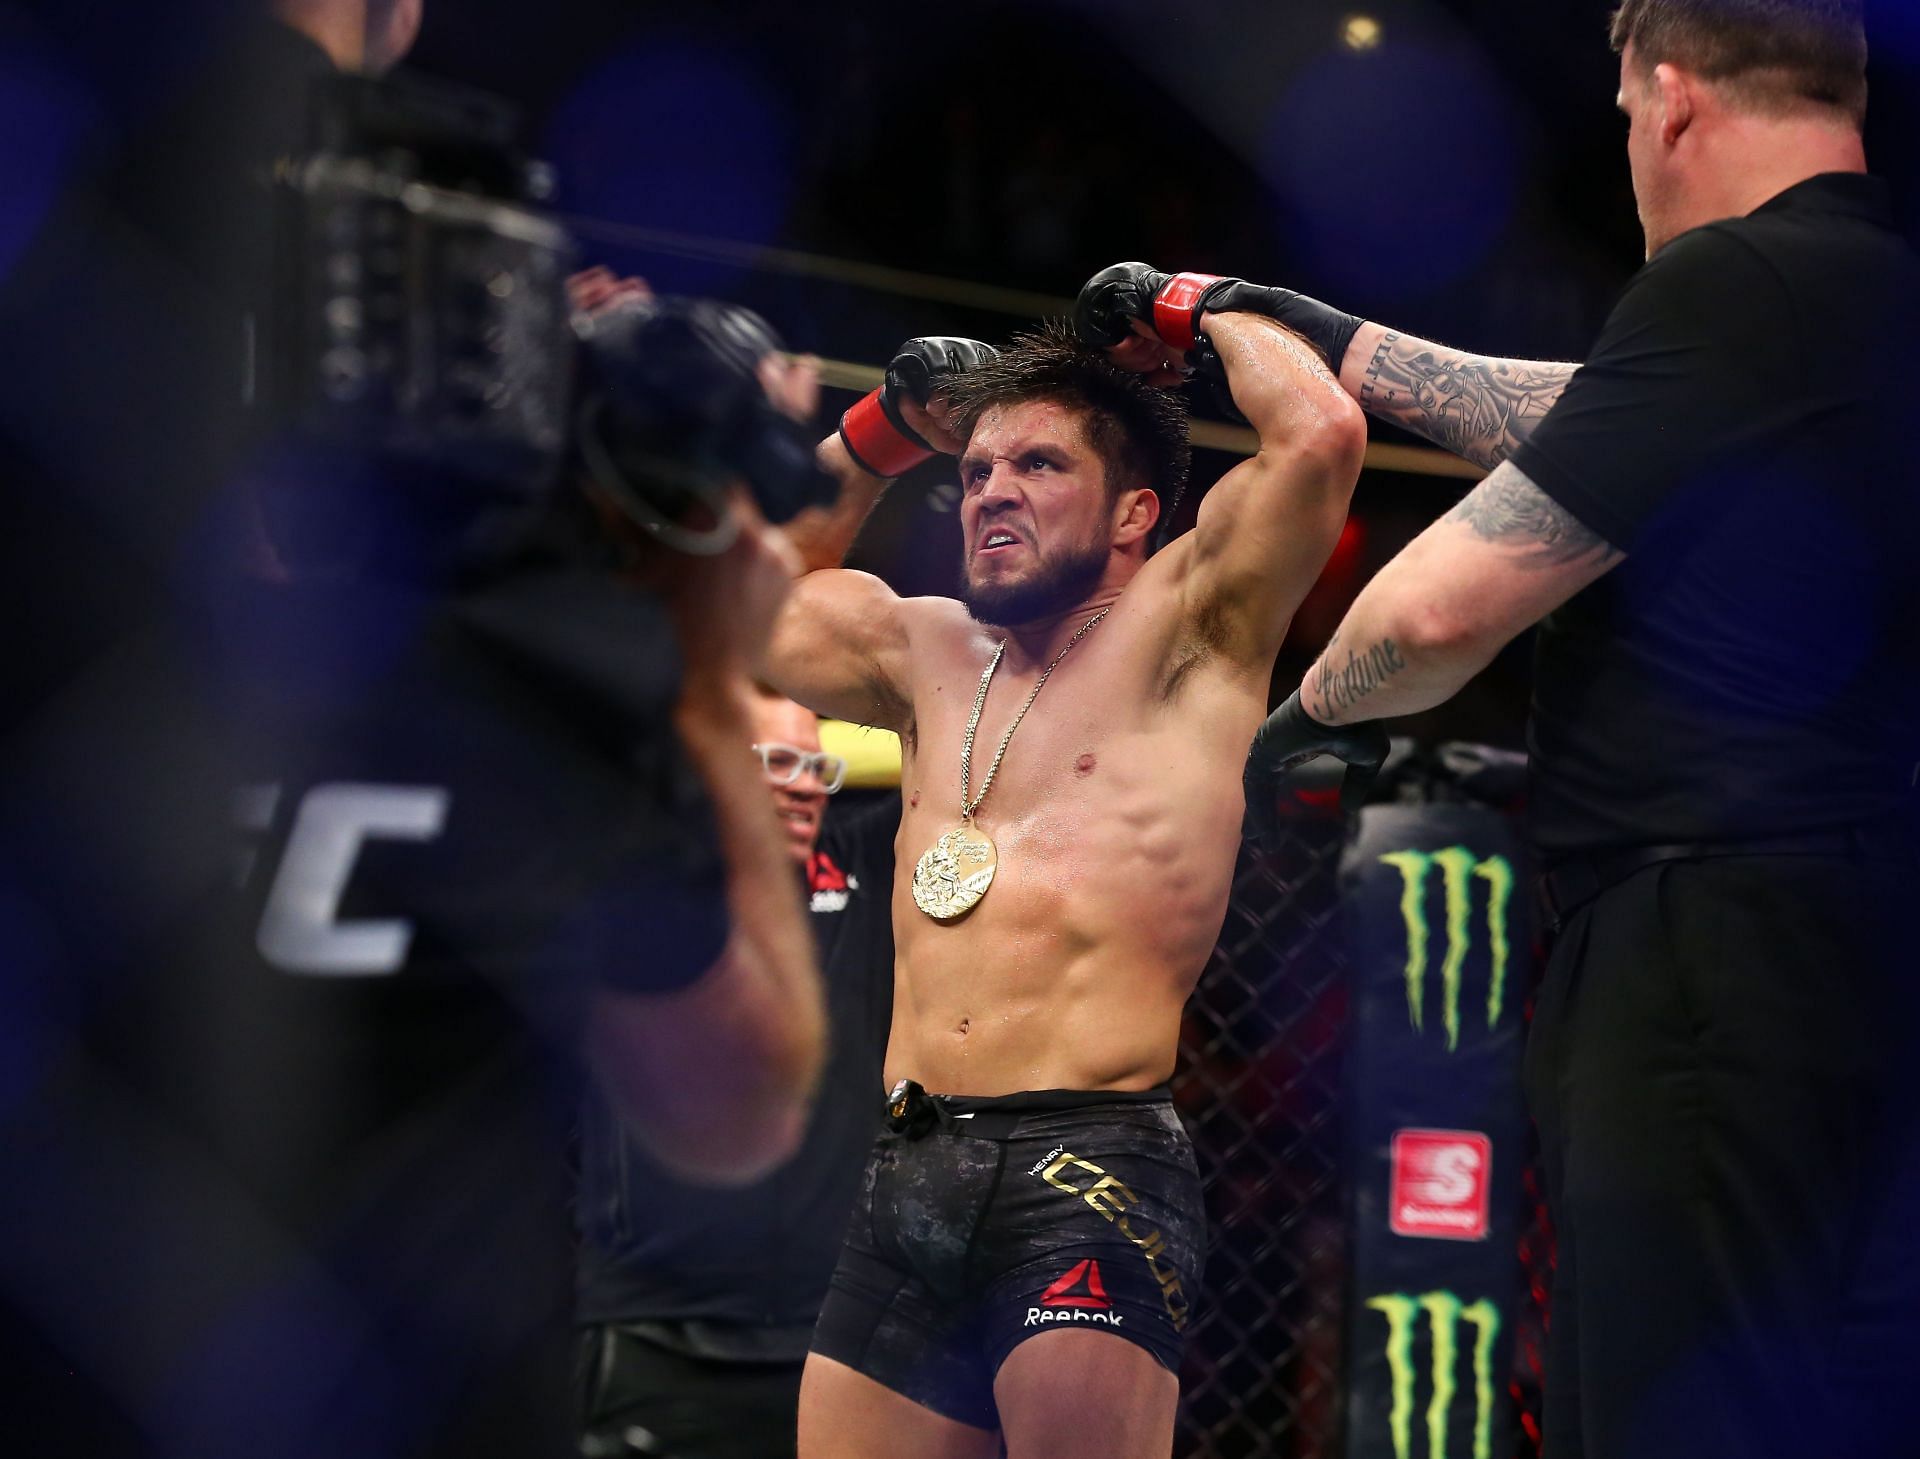 Henry Cejudo has competed at both flyweight and bantamweight.